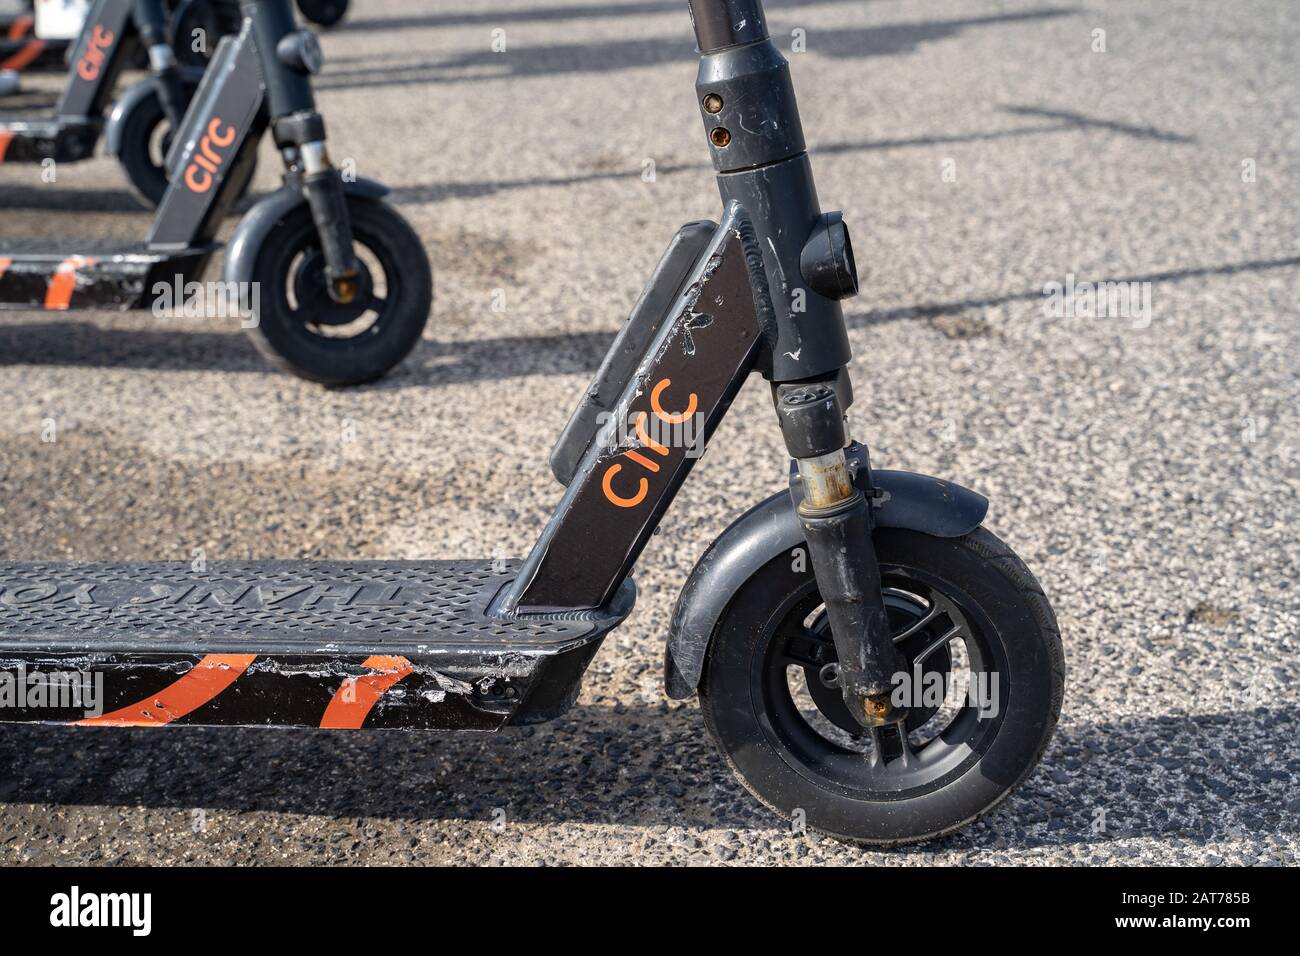 Lisbon, Portugal - January 17, 2020: Circ scooters for rent on a sidewalk in Lisbon. This is a Berlin-based e-scooter rentals company Stock Photo